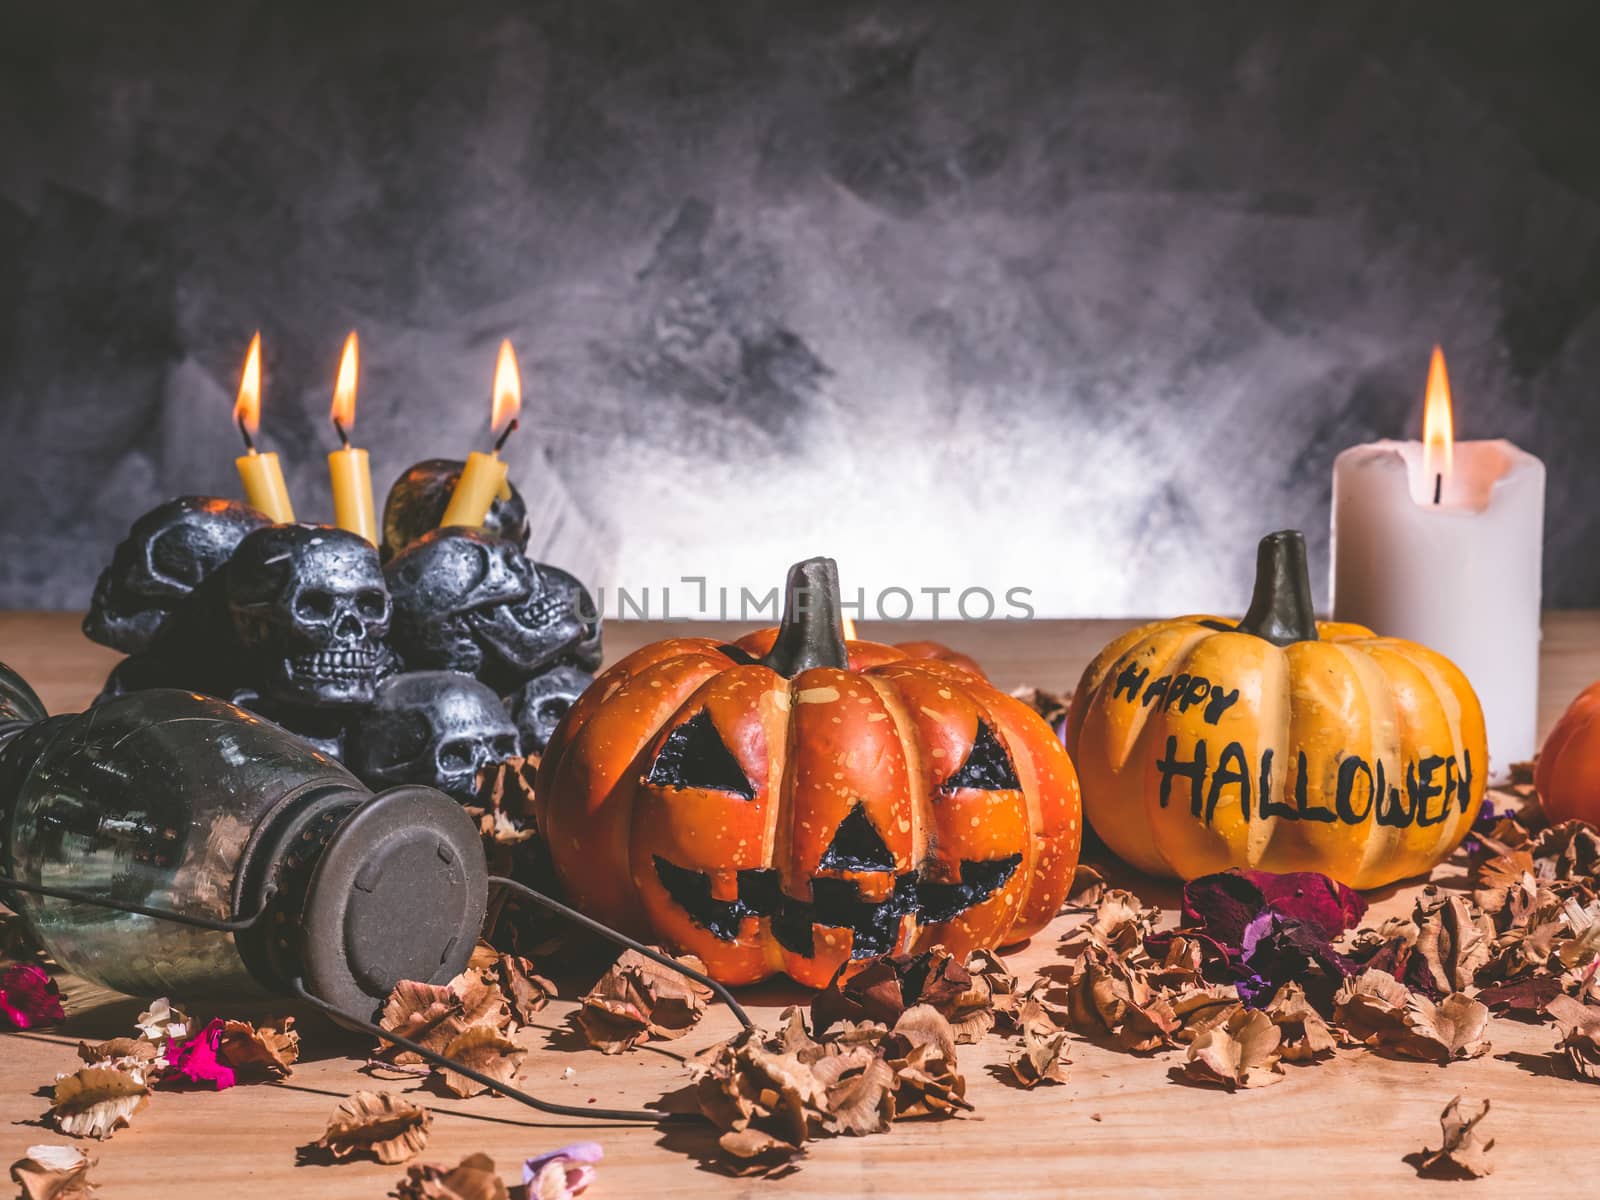 Halloween pumpkins with candlelight and skulls on dark background by ronnarong